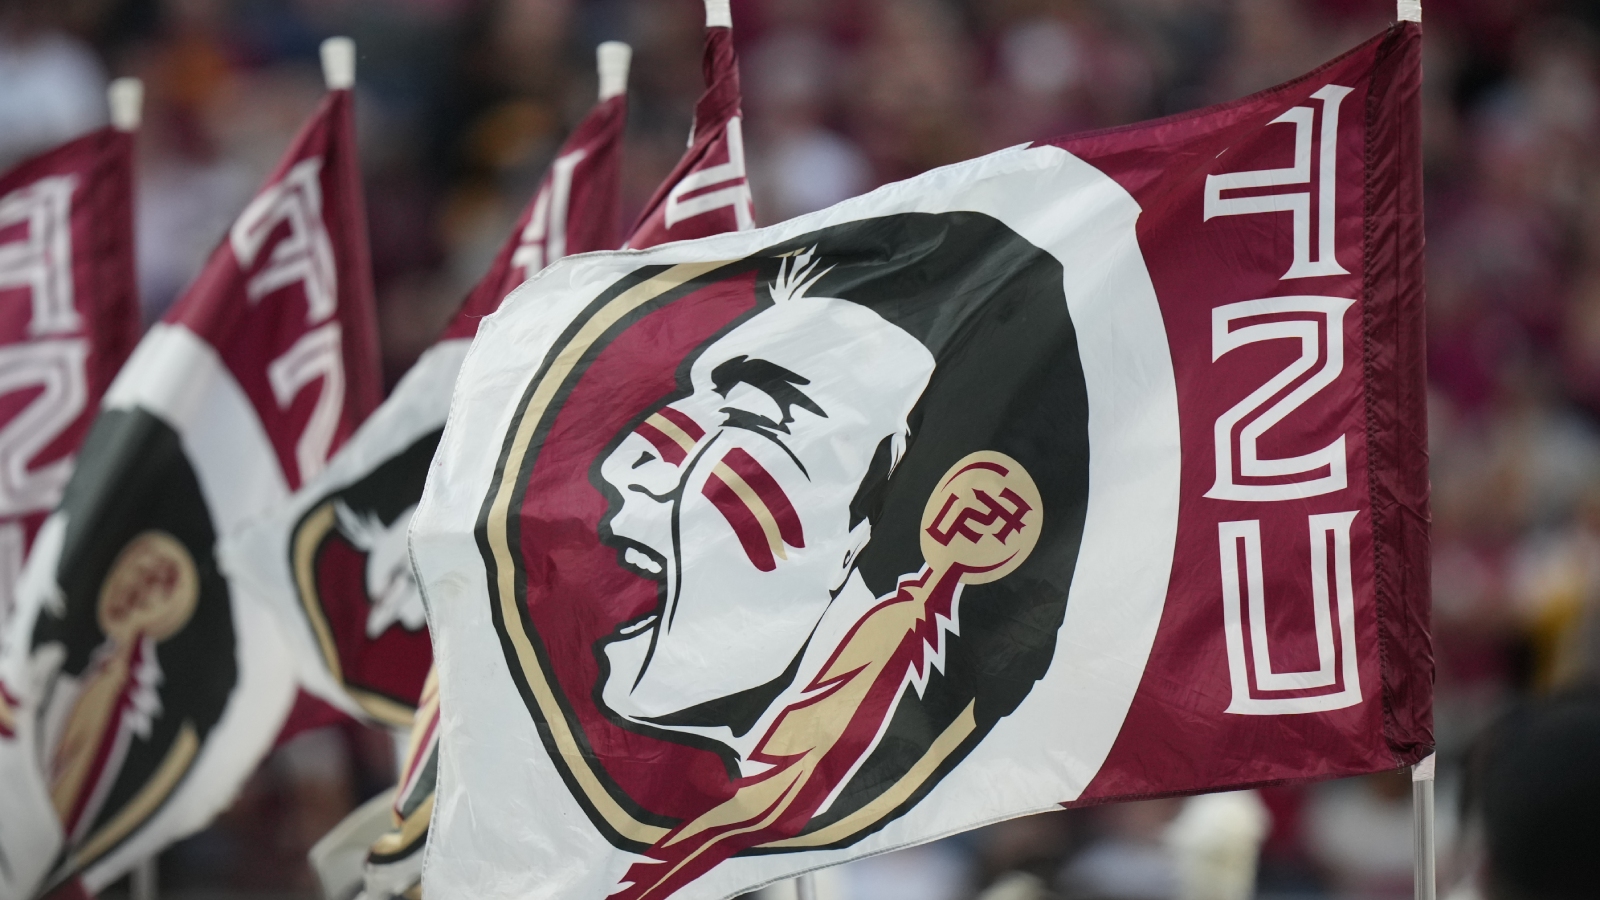 Florida State AD rips CFP officials after being left out: 'The